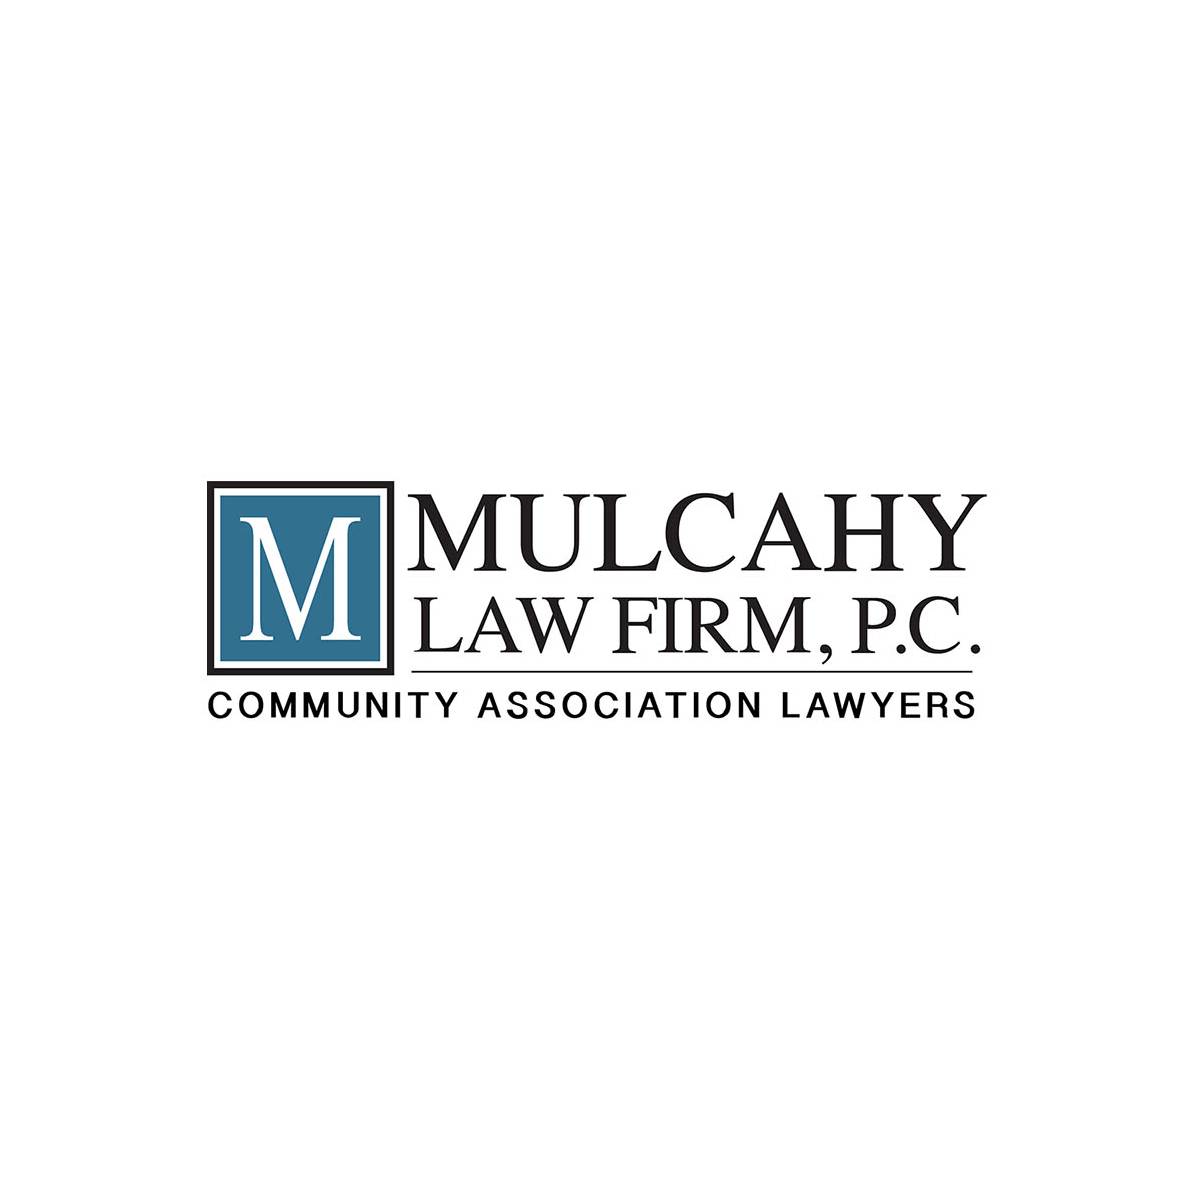 Mulcahy Law Firm, P.C. Profile Picture